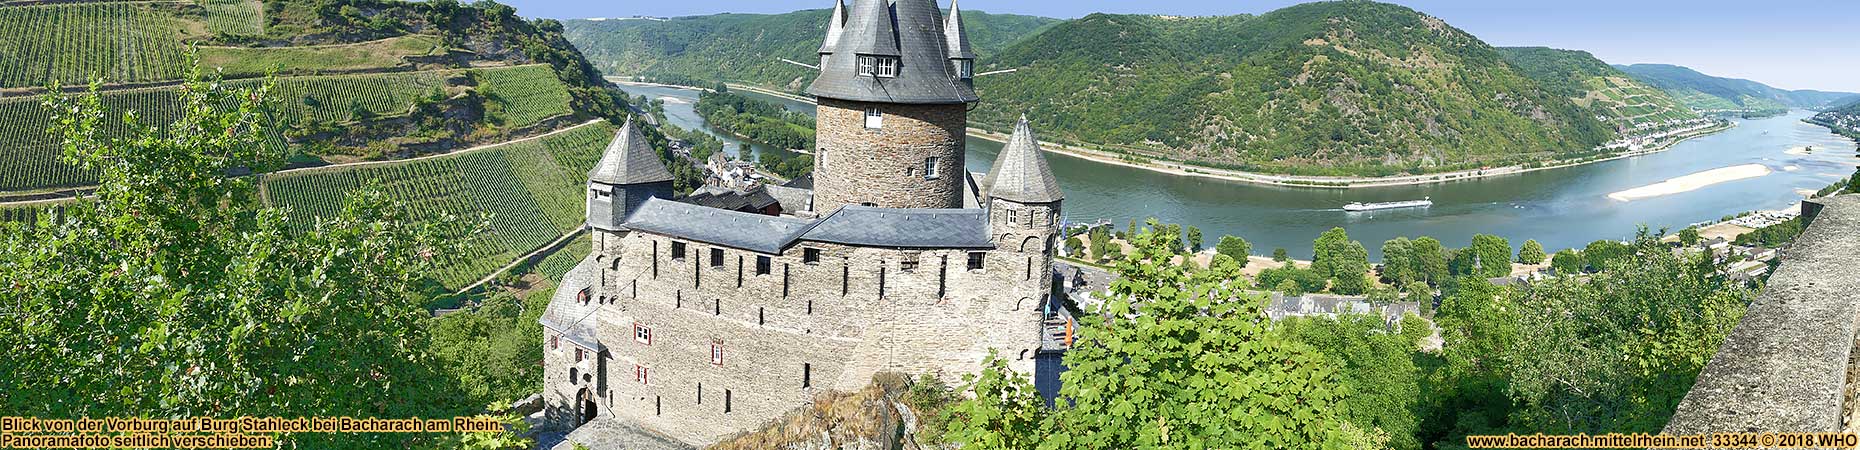 Castle Stahleck above Bacharach on the Rhine River